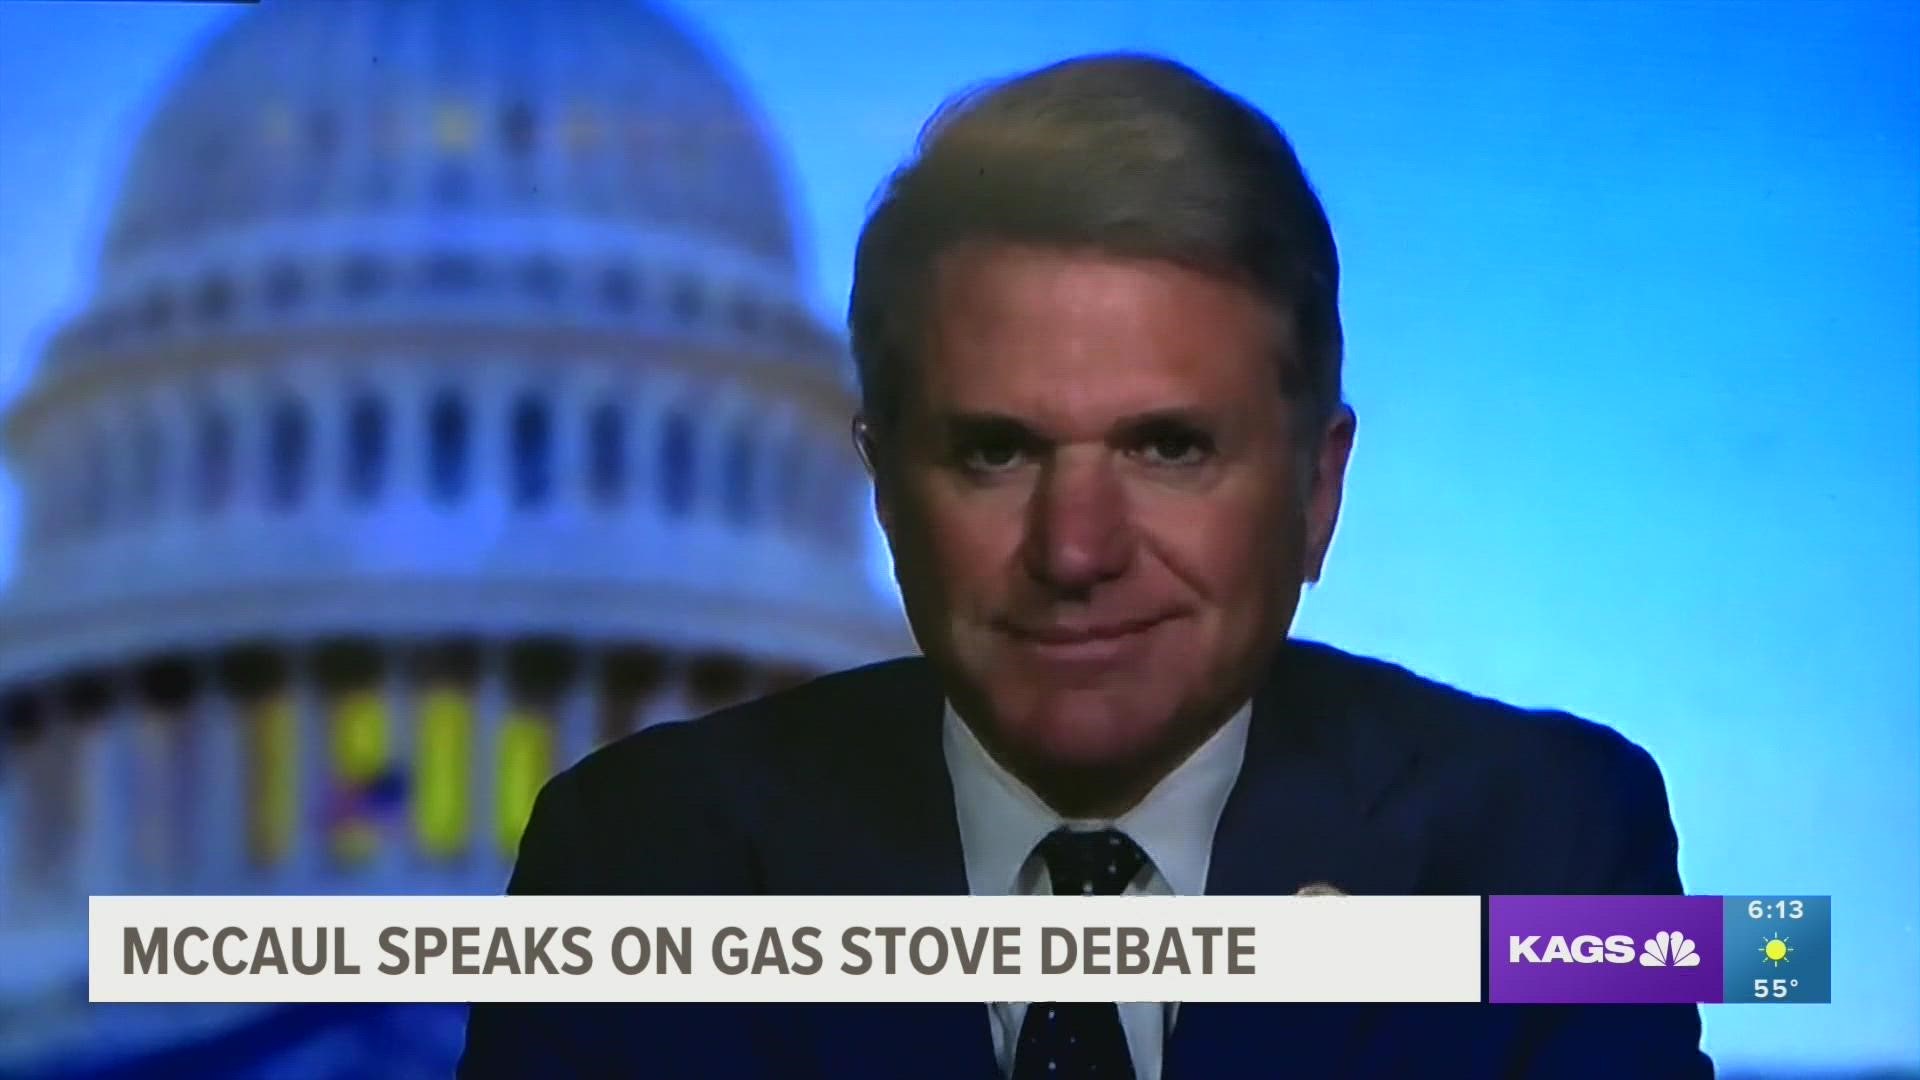 Michael McCaul, U.S. Representative for Texas' 10th District, said that a nationwide ban on gas stoves would be "federal overreach."